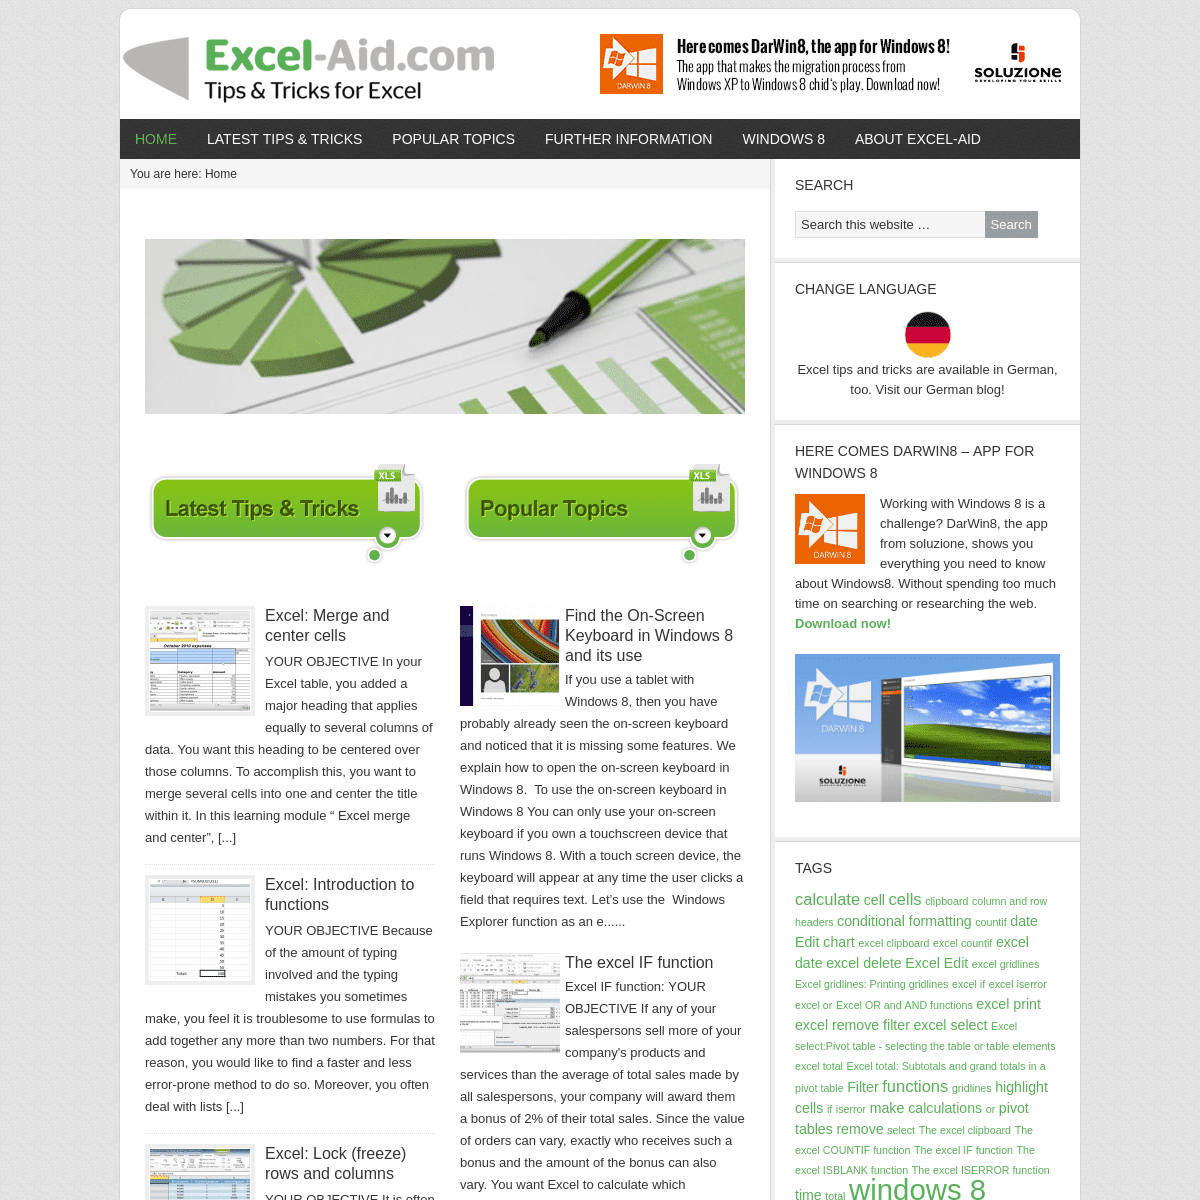 A complete backup of excel-aid.com